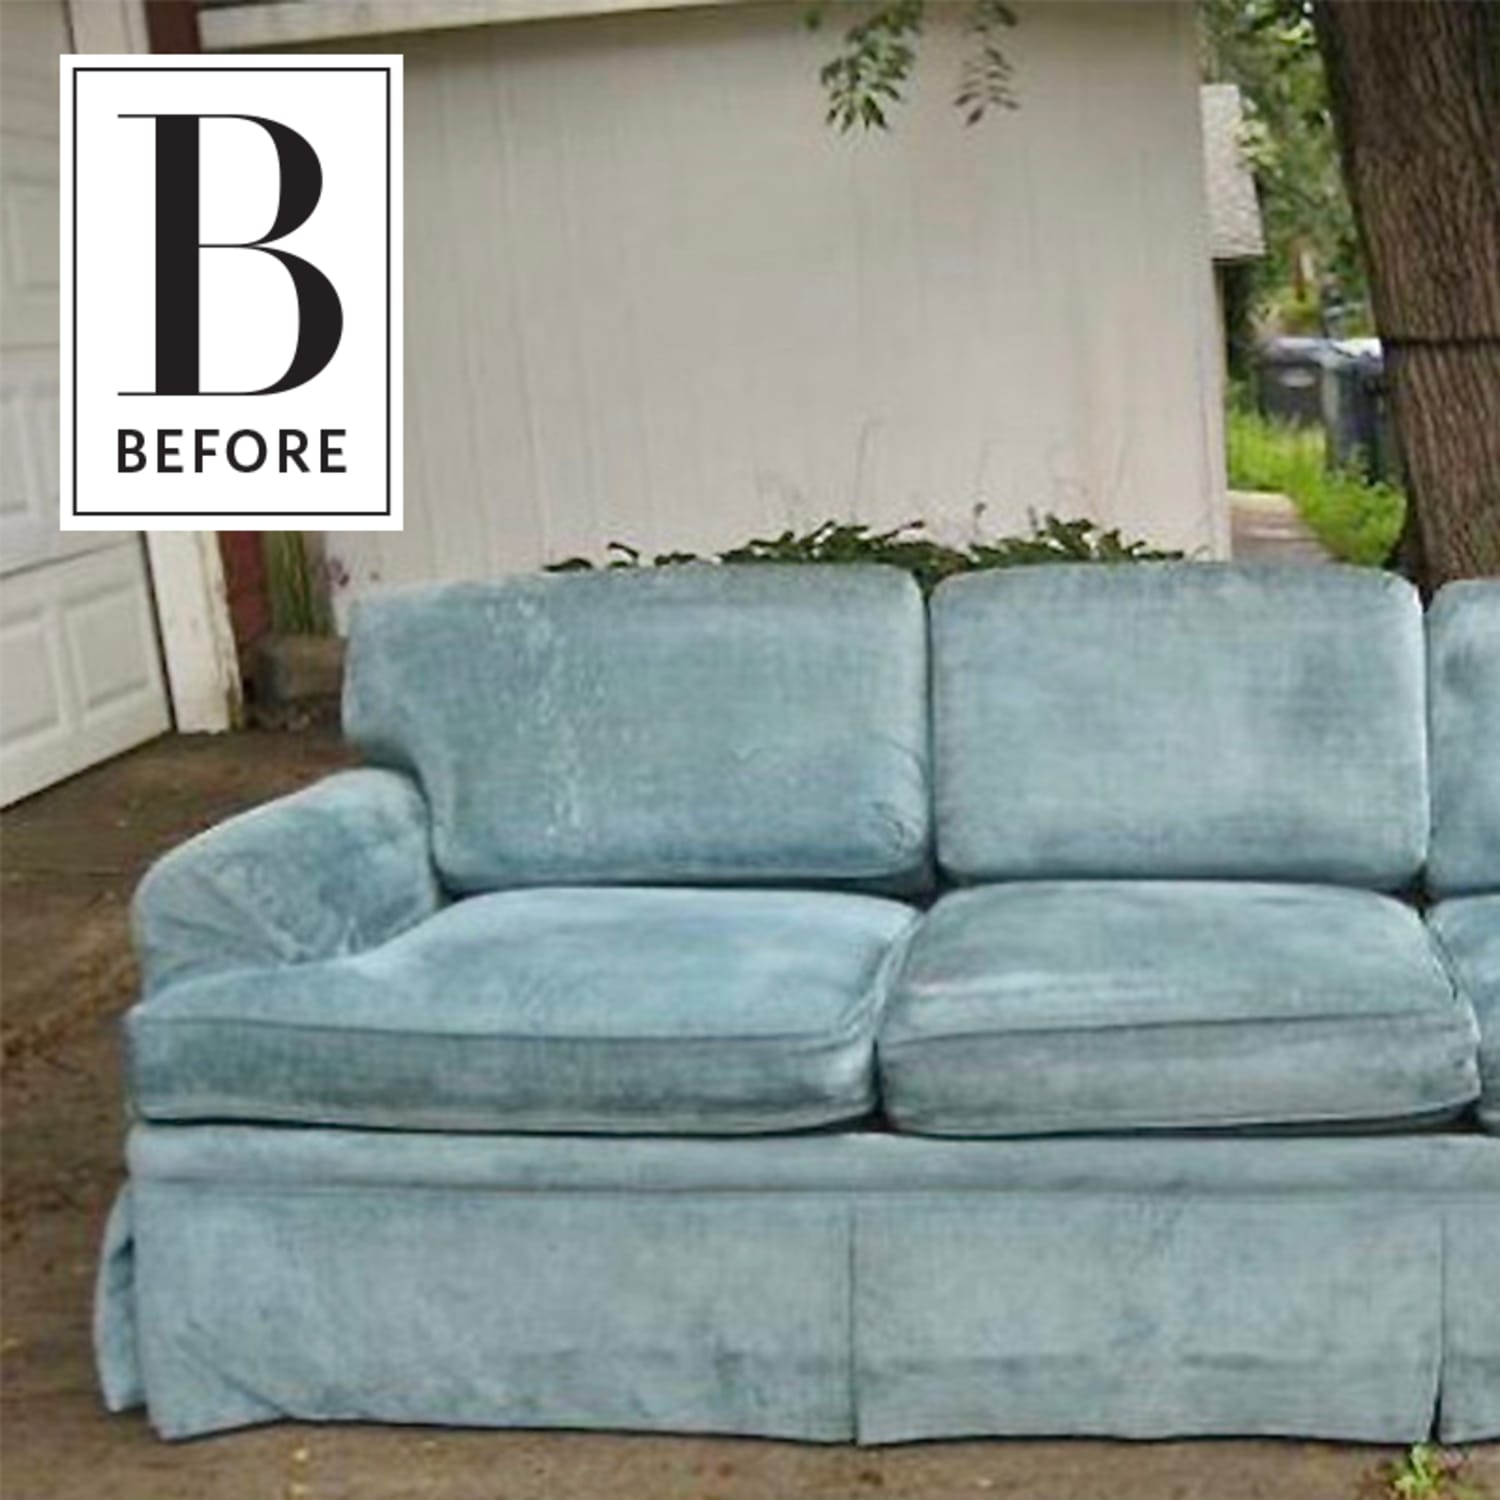 Rit Dye Tips  The Process of Dyeing A Sofa